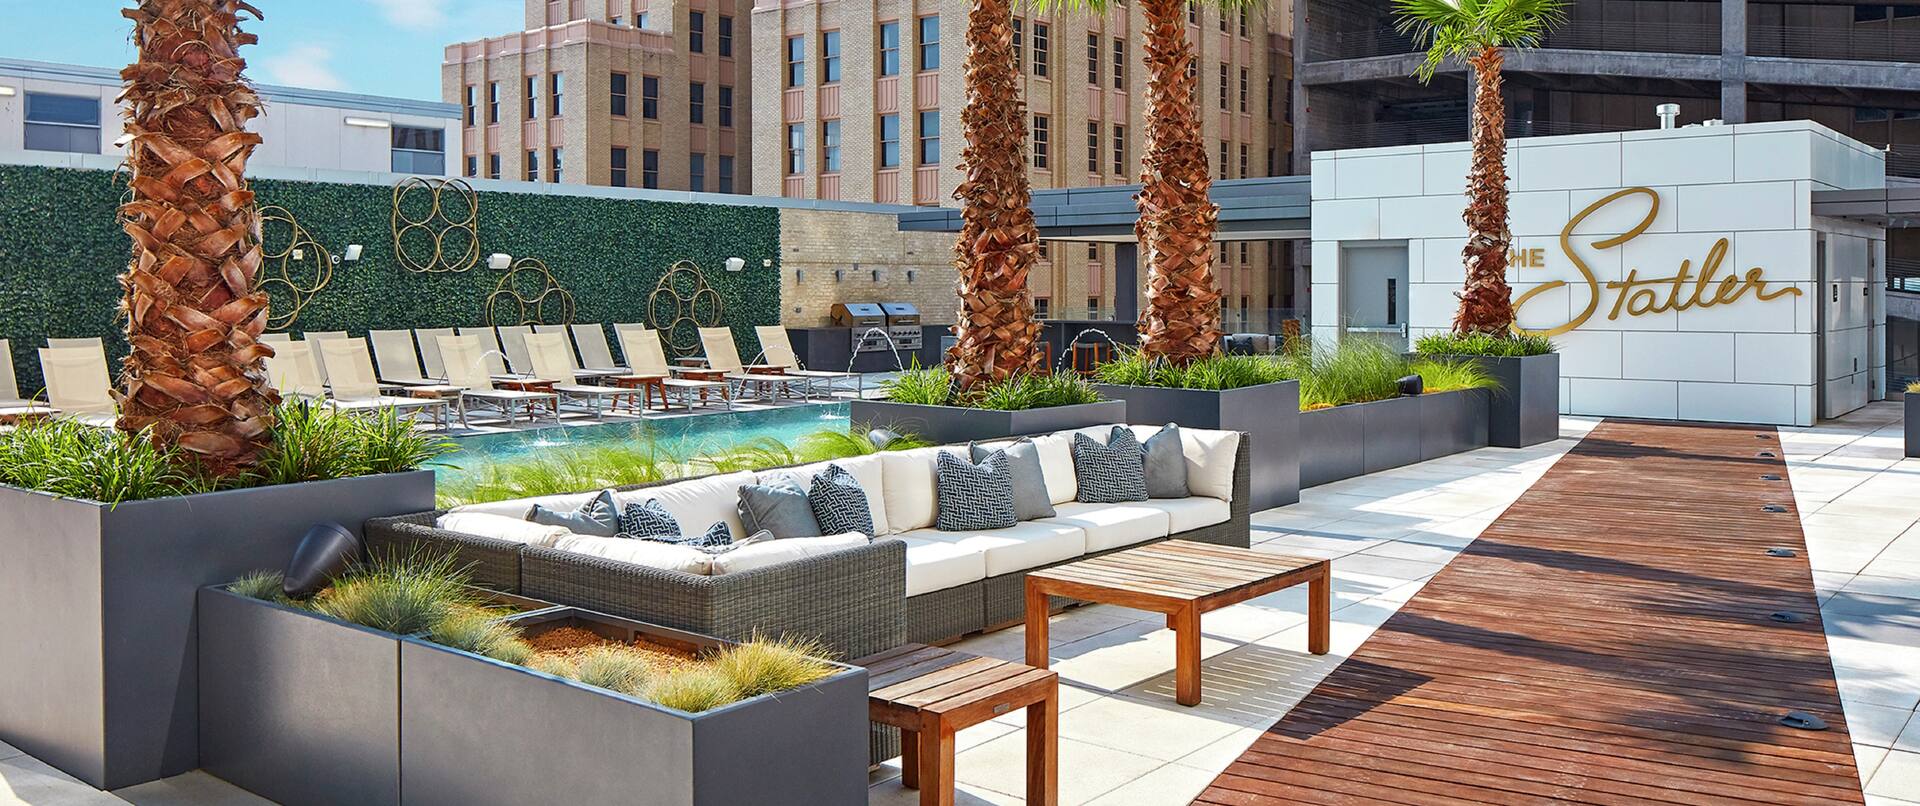 Lounge Area Next to Rooftop Pool